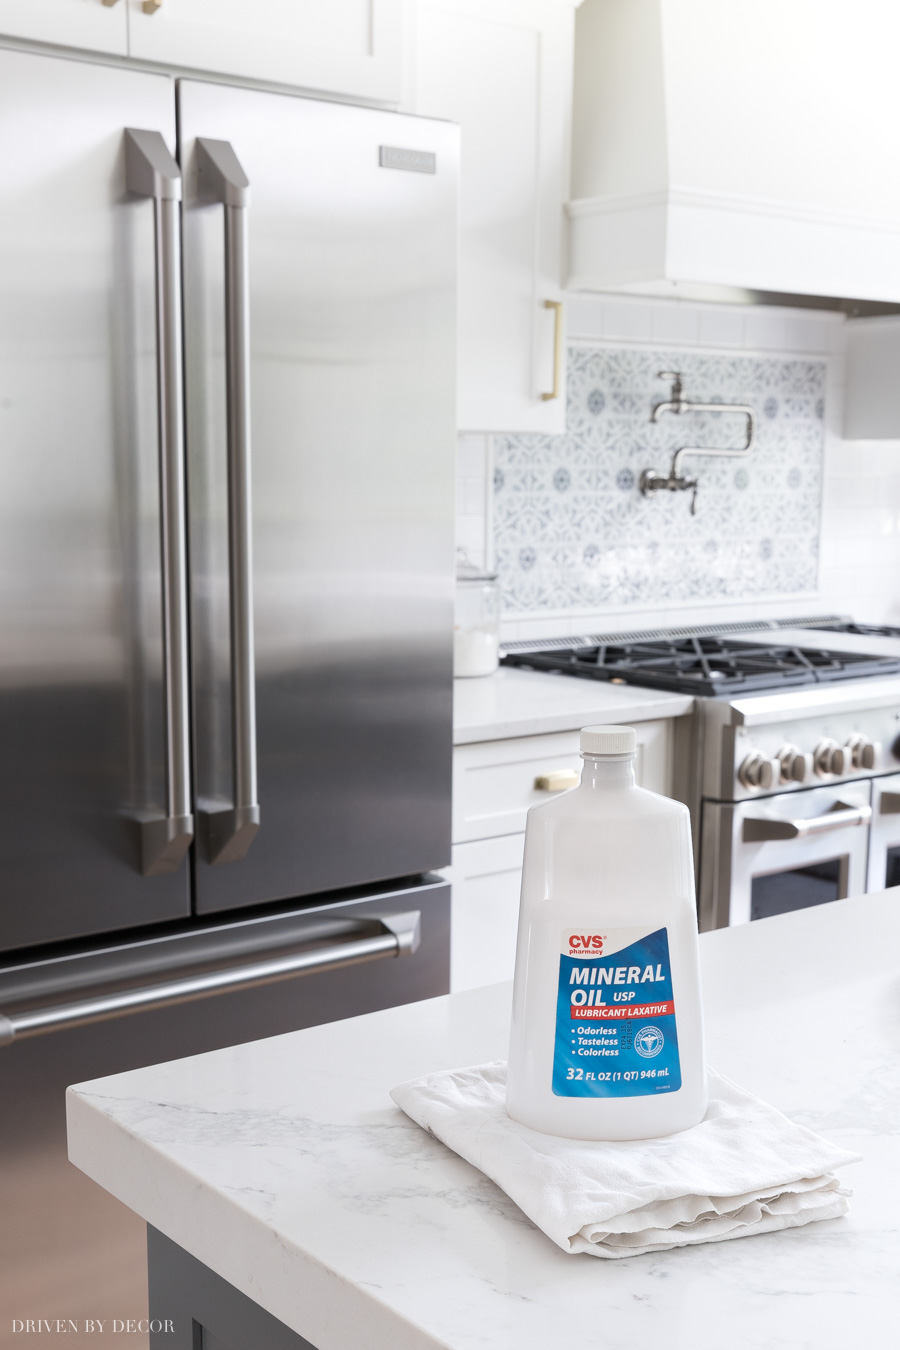 Love these tips! Was able to get my stainless steel appliances clean and streak free!